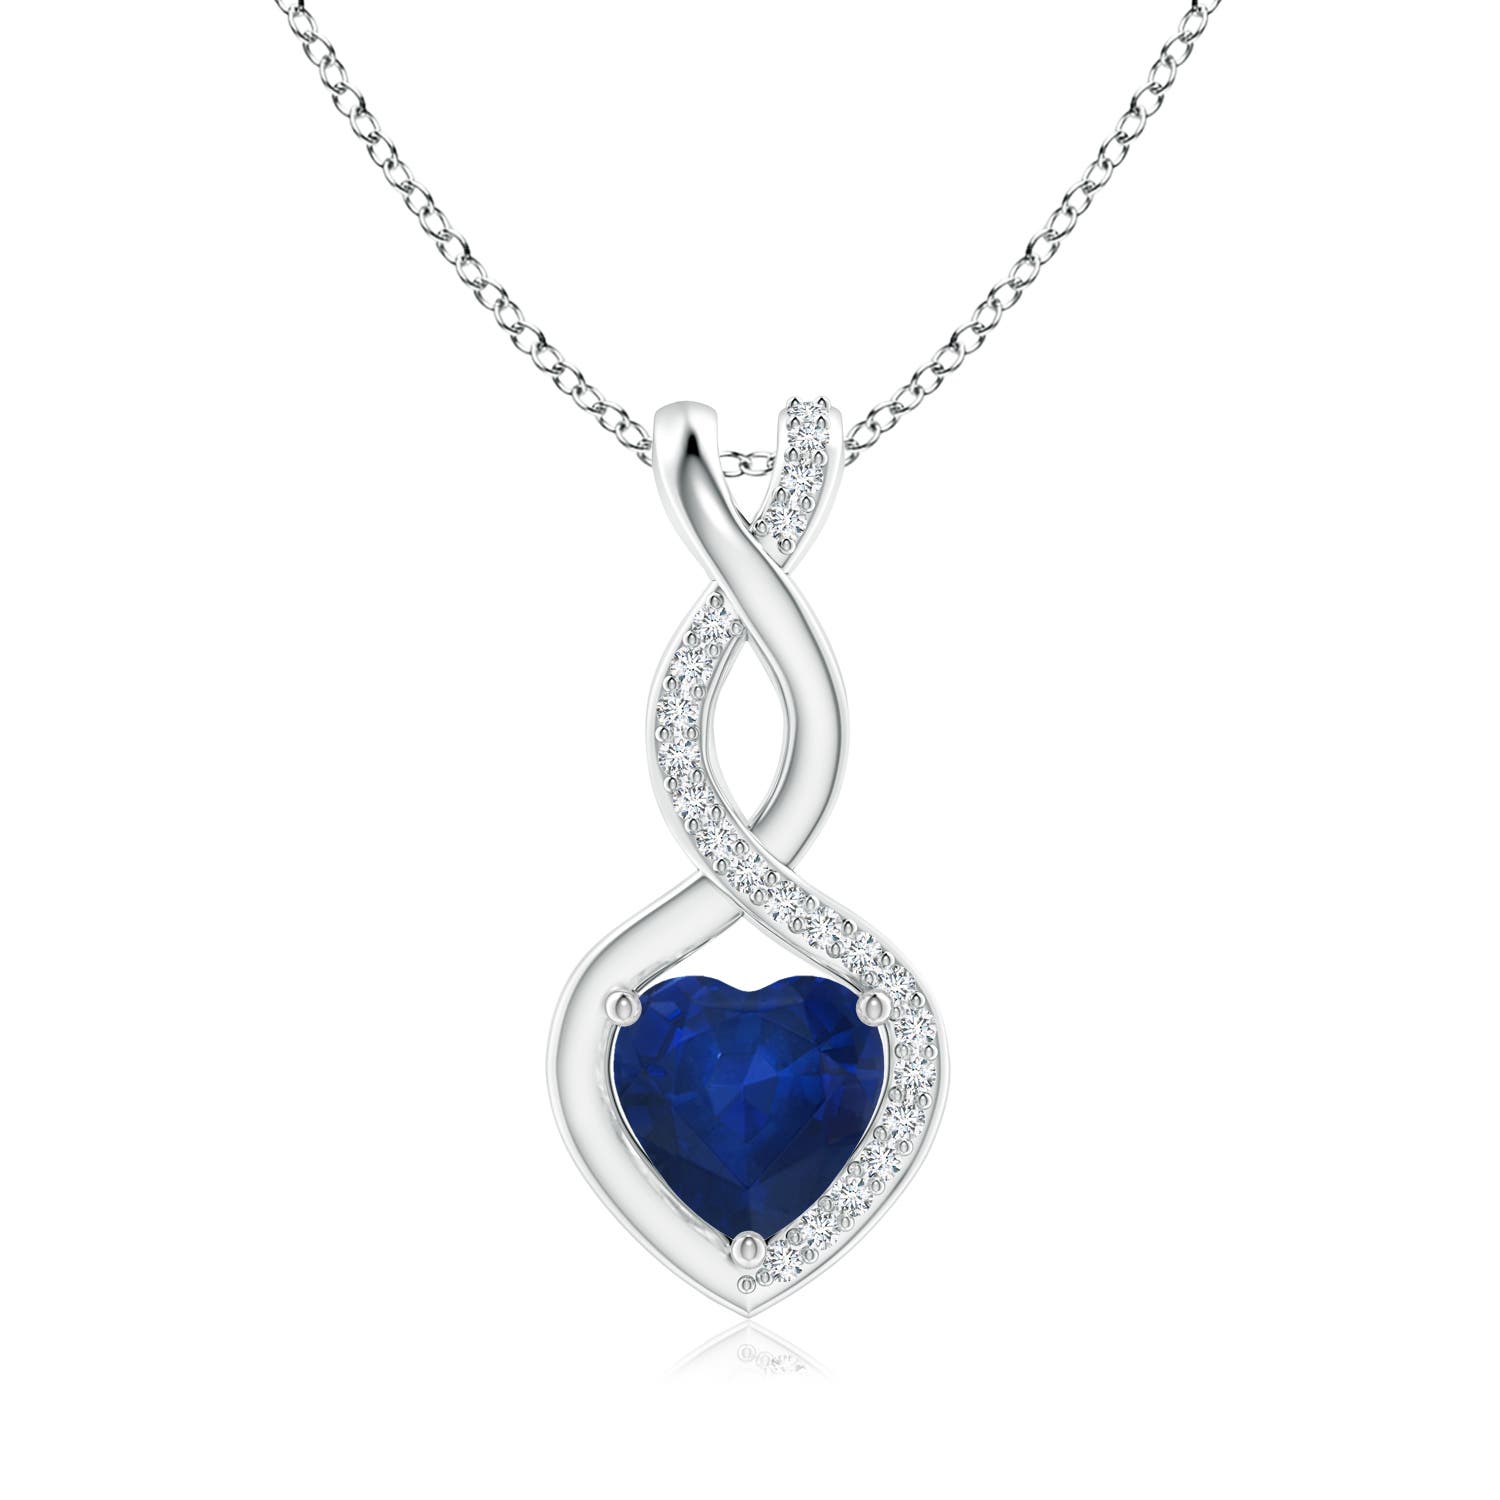 AA - Blue Sapphire / 0.94 CT / 14 KT White Gold